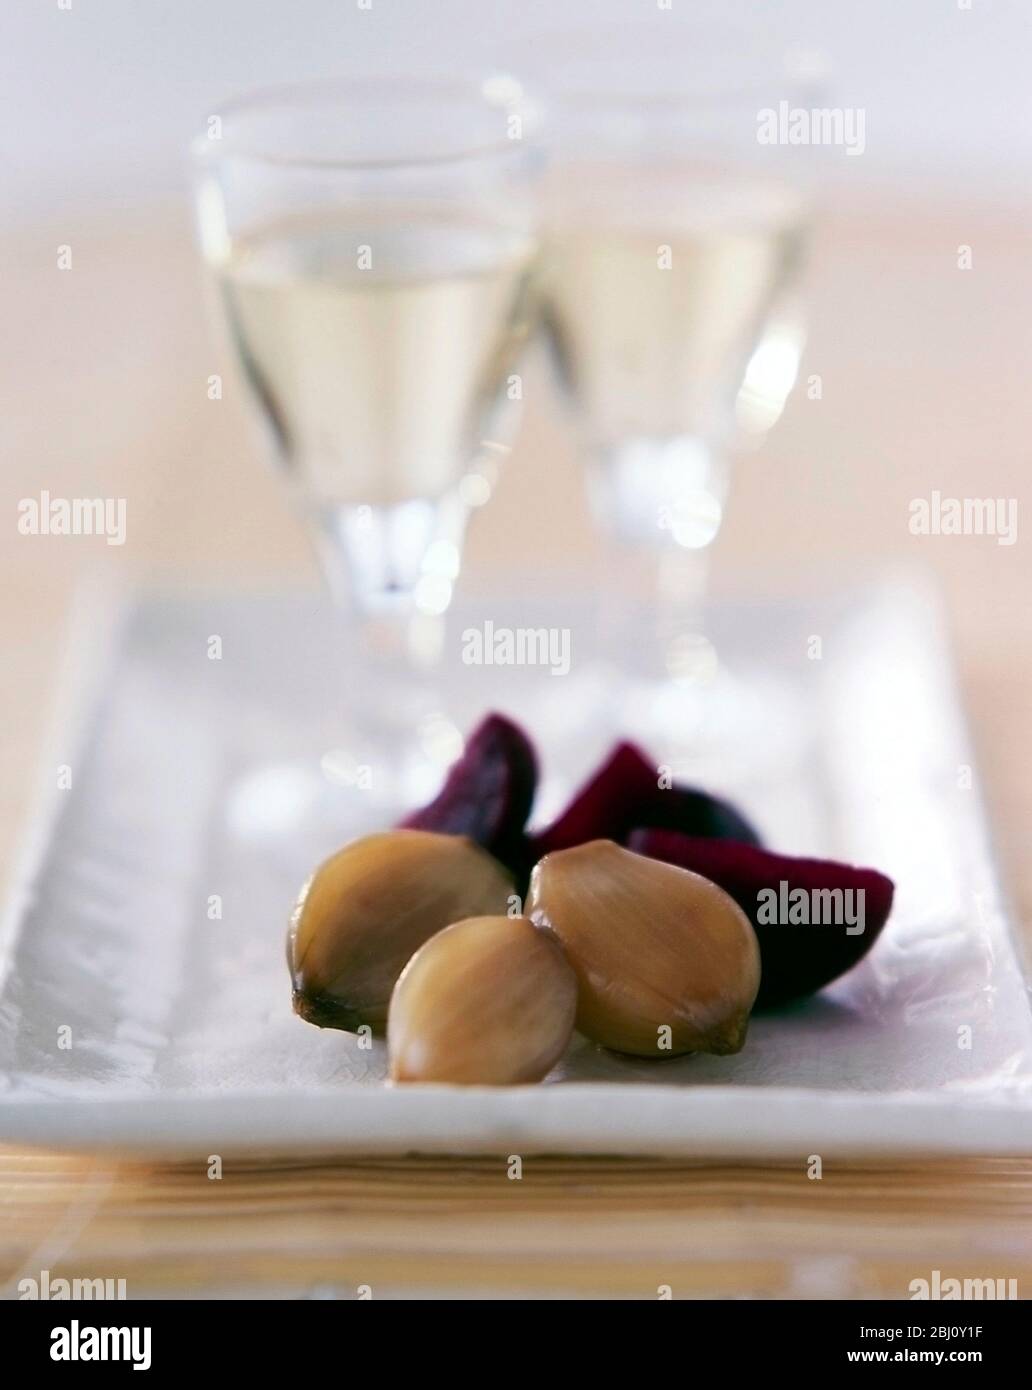 Pickled onions and beetroot pieces as accomopaniment to chilled white wine as an hors d'ouevre - Stock Photo